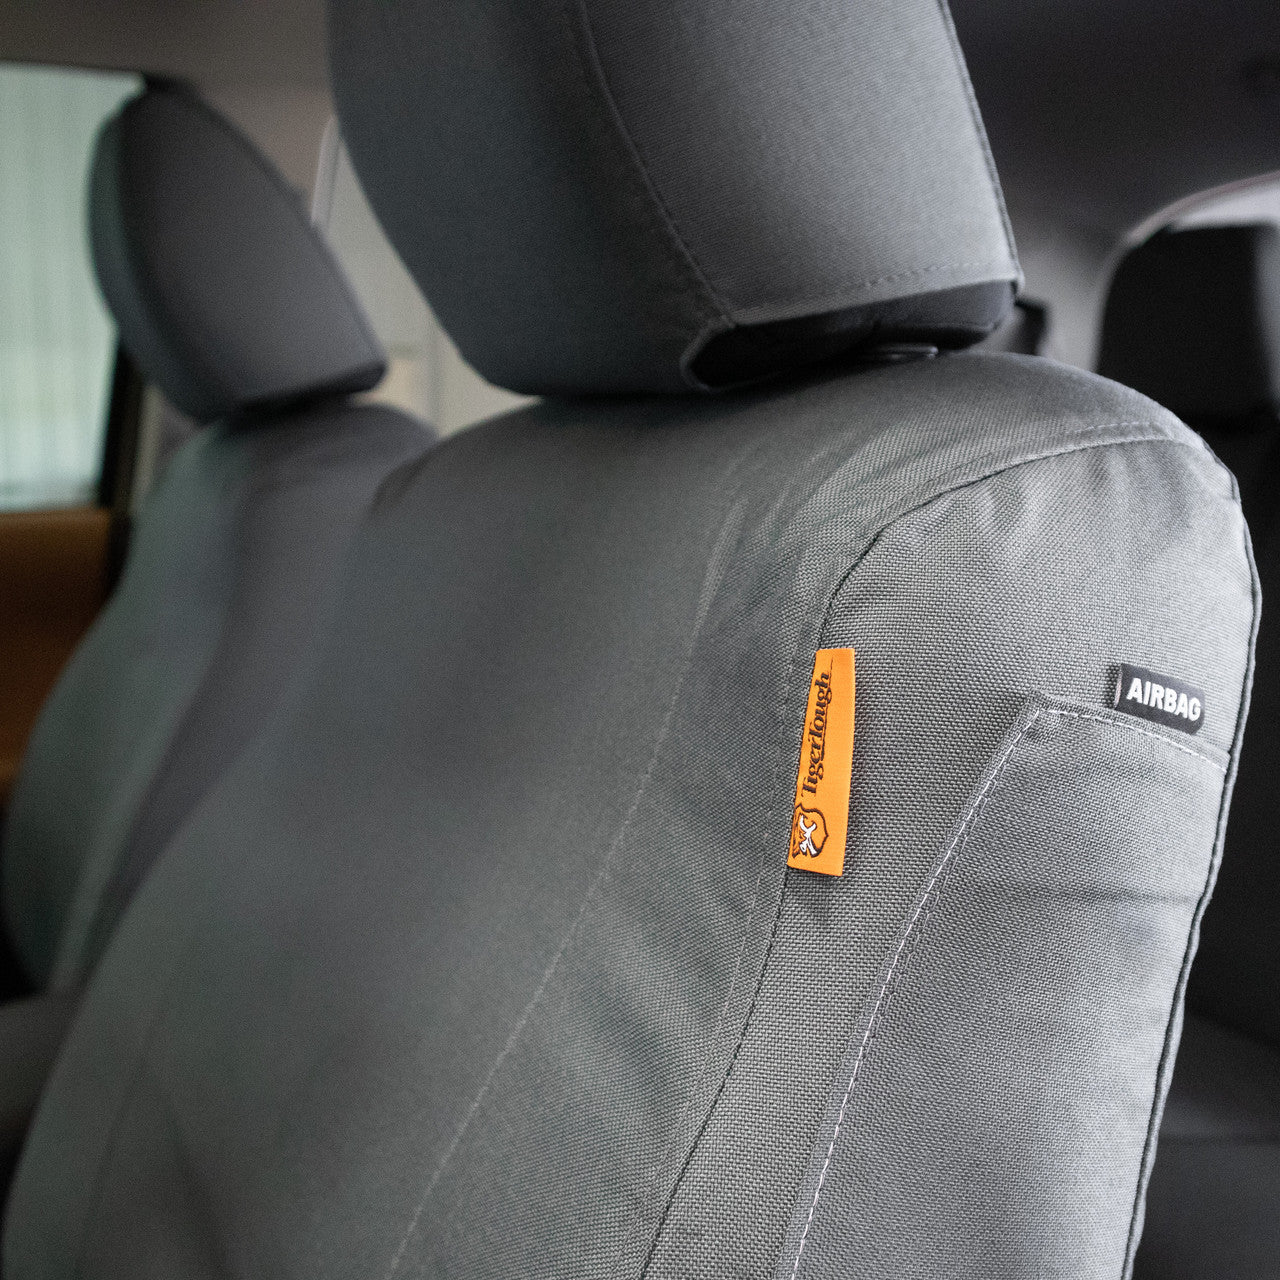 TigerTough Gray Seat Covers on a Toyota Tacoma Headrest Cover Detail